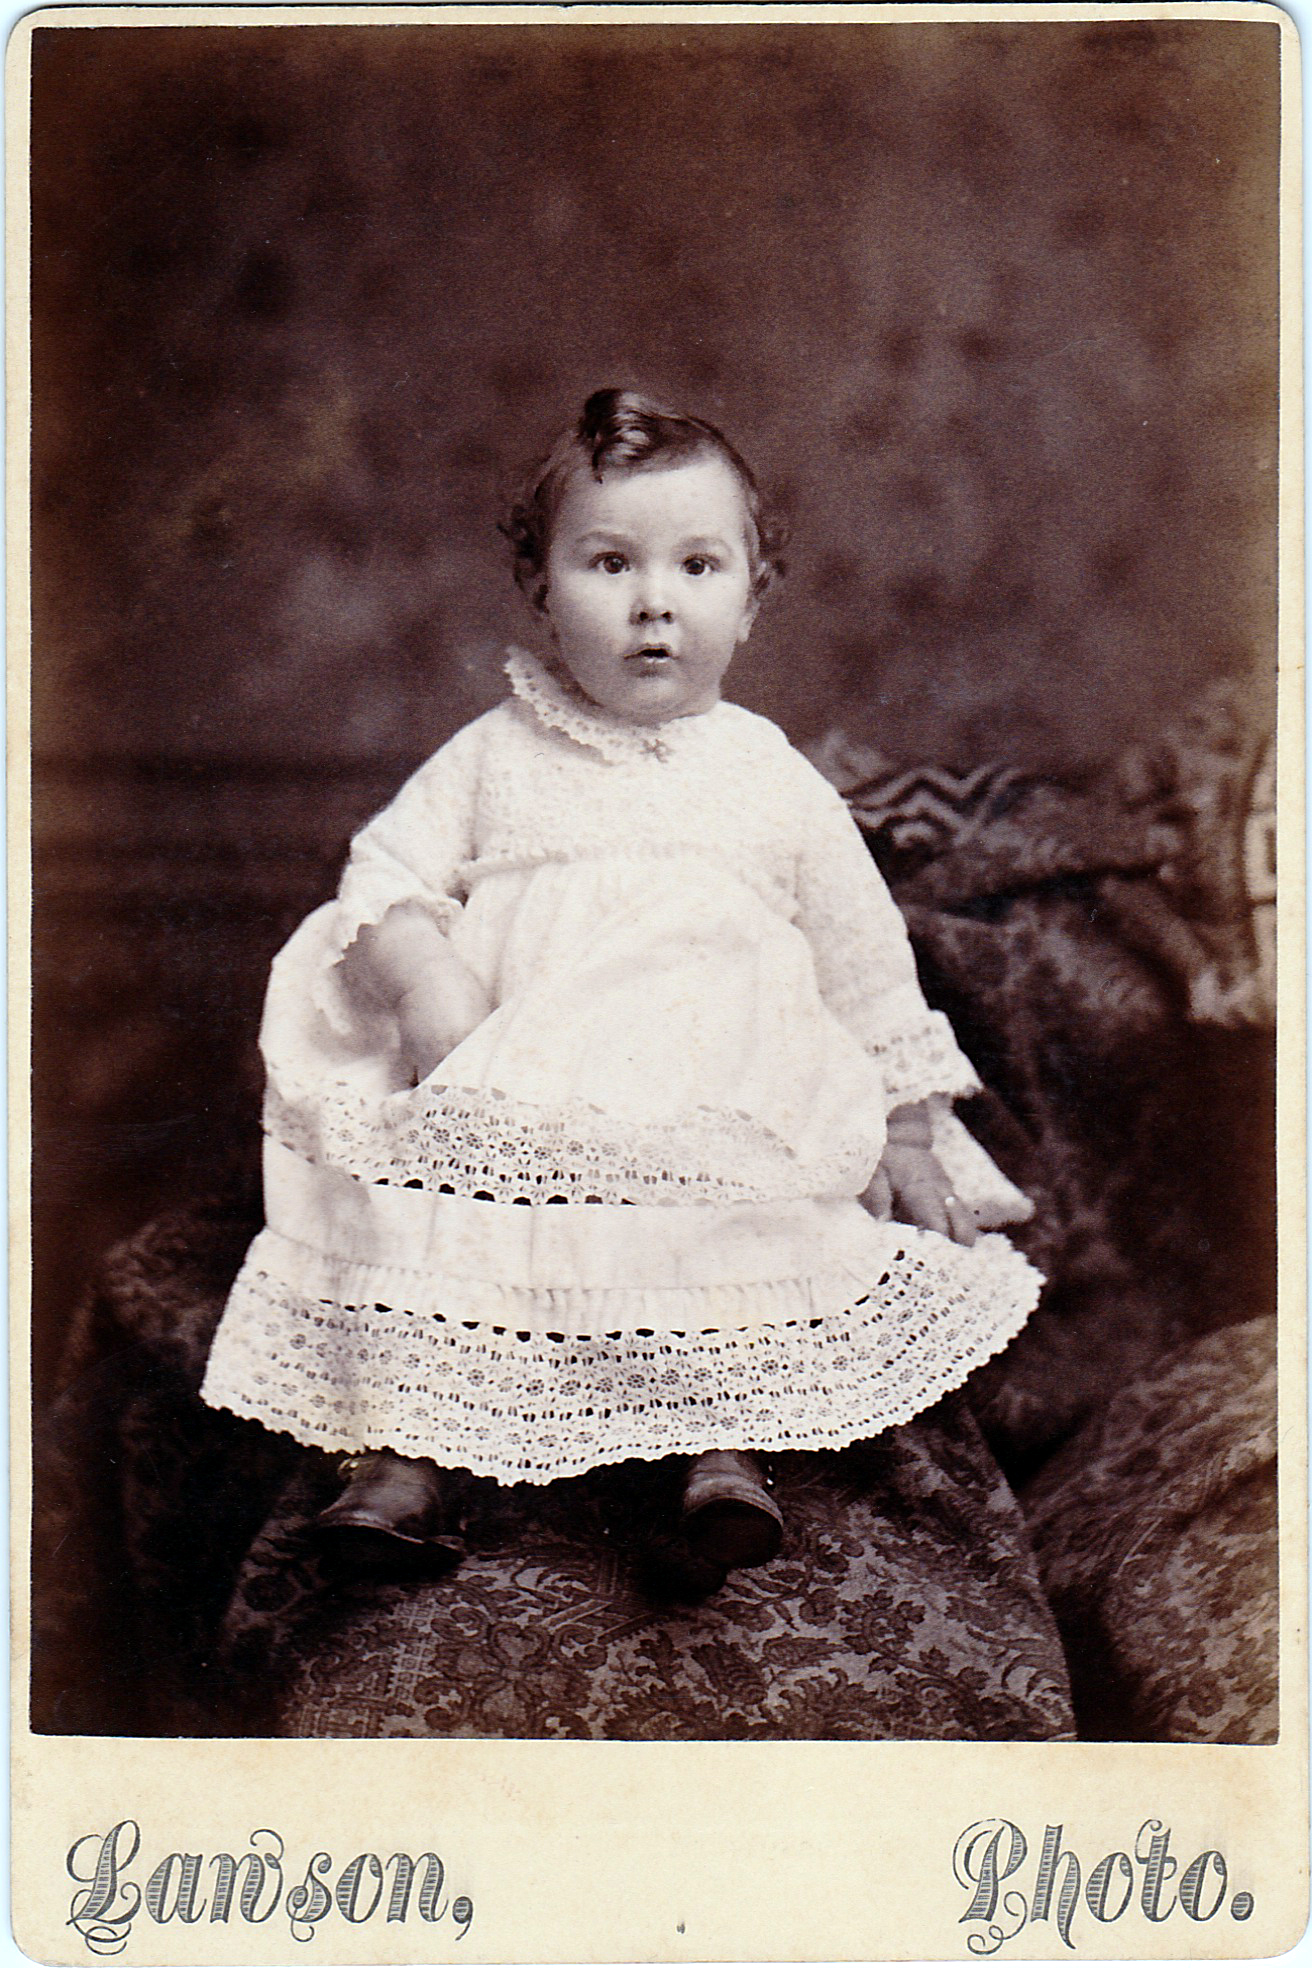 Photo of Charles F. Adams as a baby.